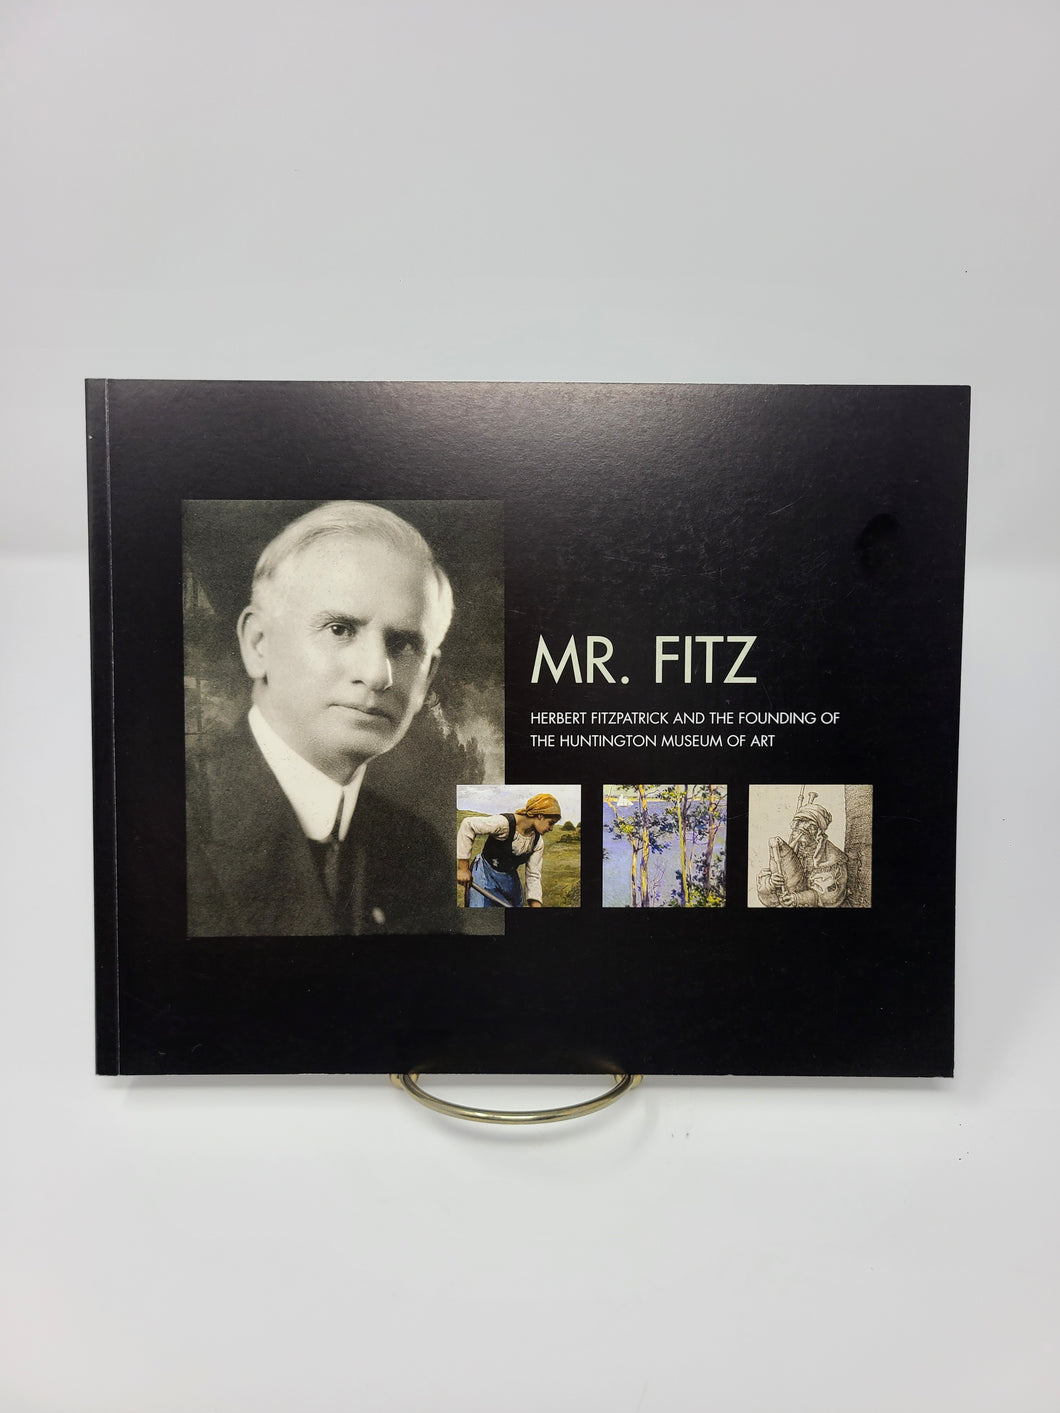 Mr. Fitz: Herbert Fitzpatrick and the Founding of the Huntington Museum of Art